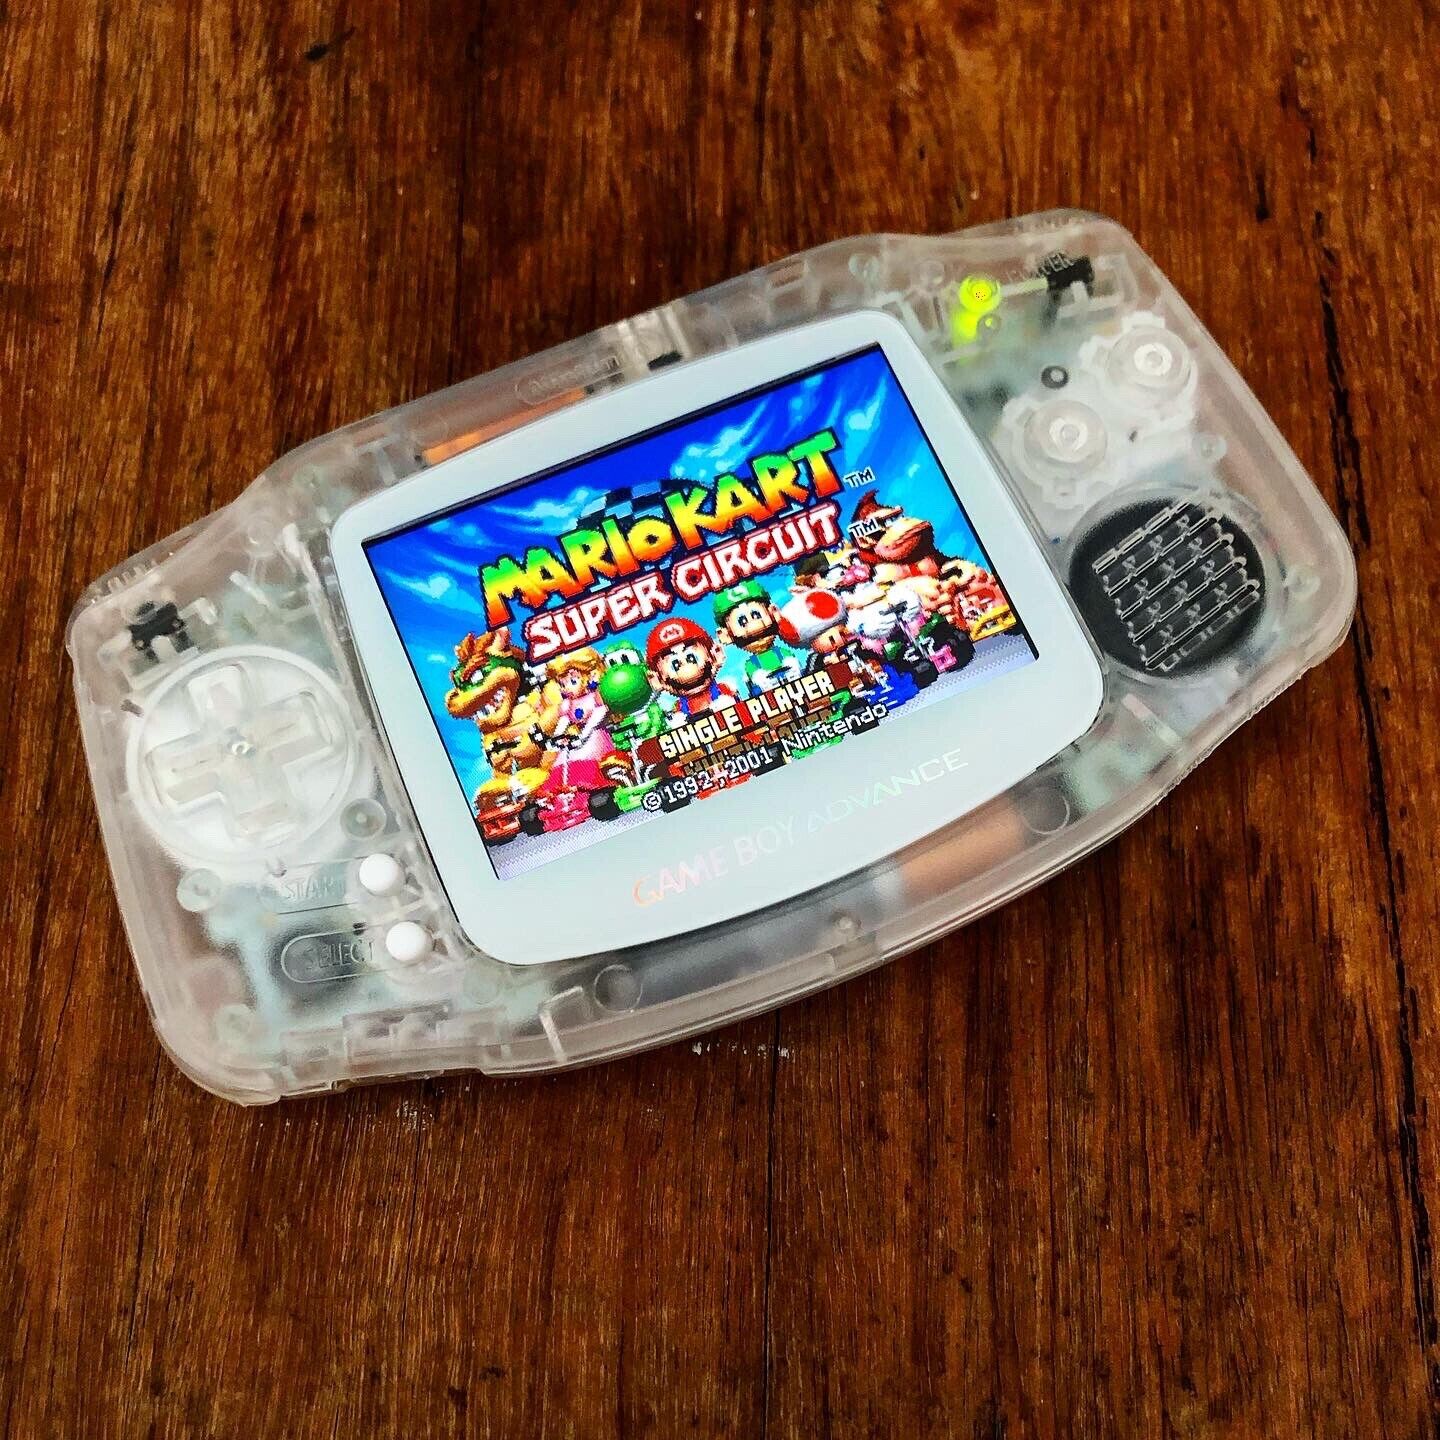 Nintendo Gameboy Advance GBA Clear White Handheld Console BACKLIT IPS V2 Game